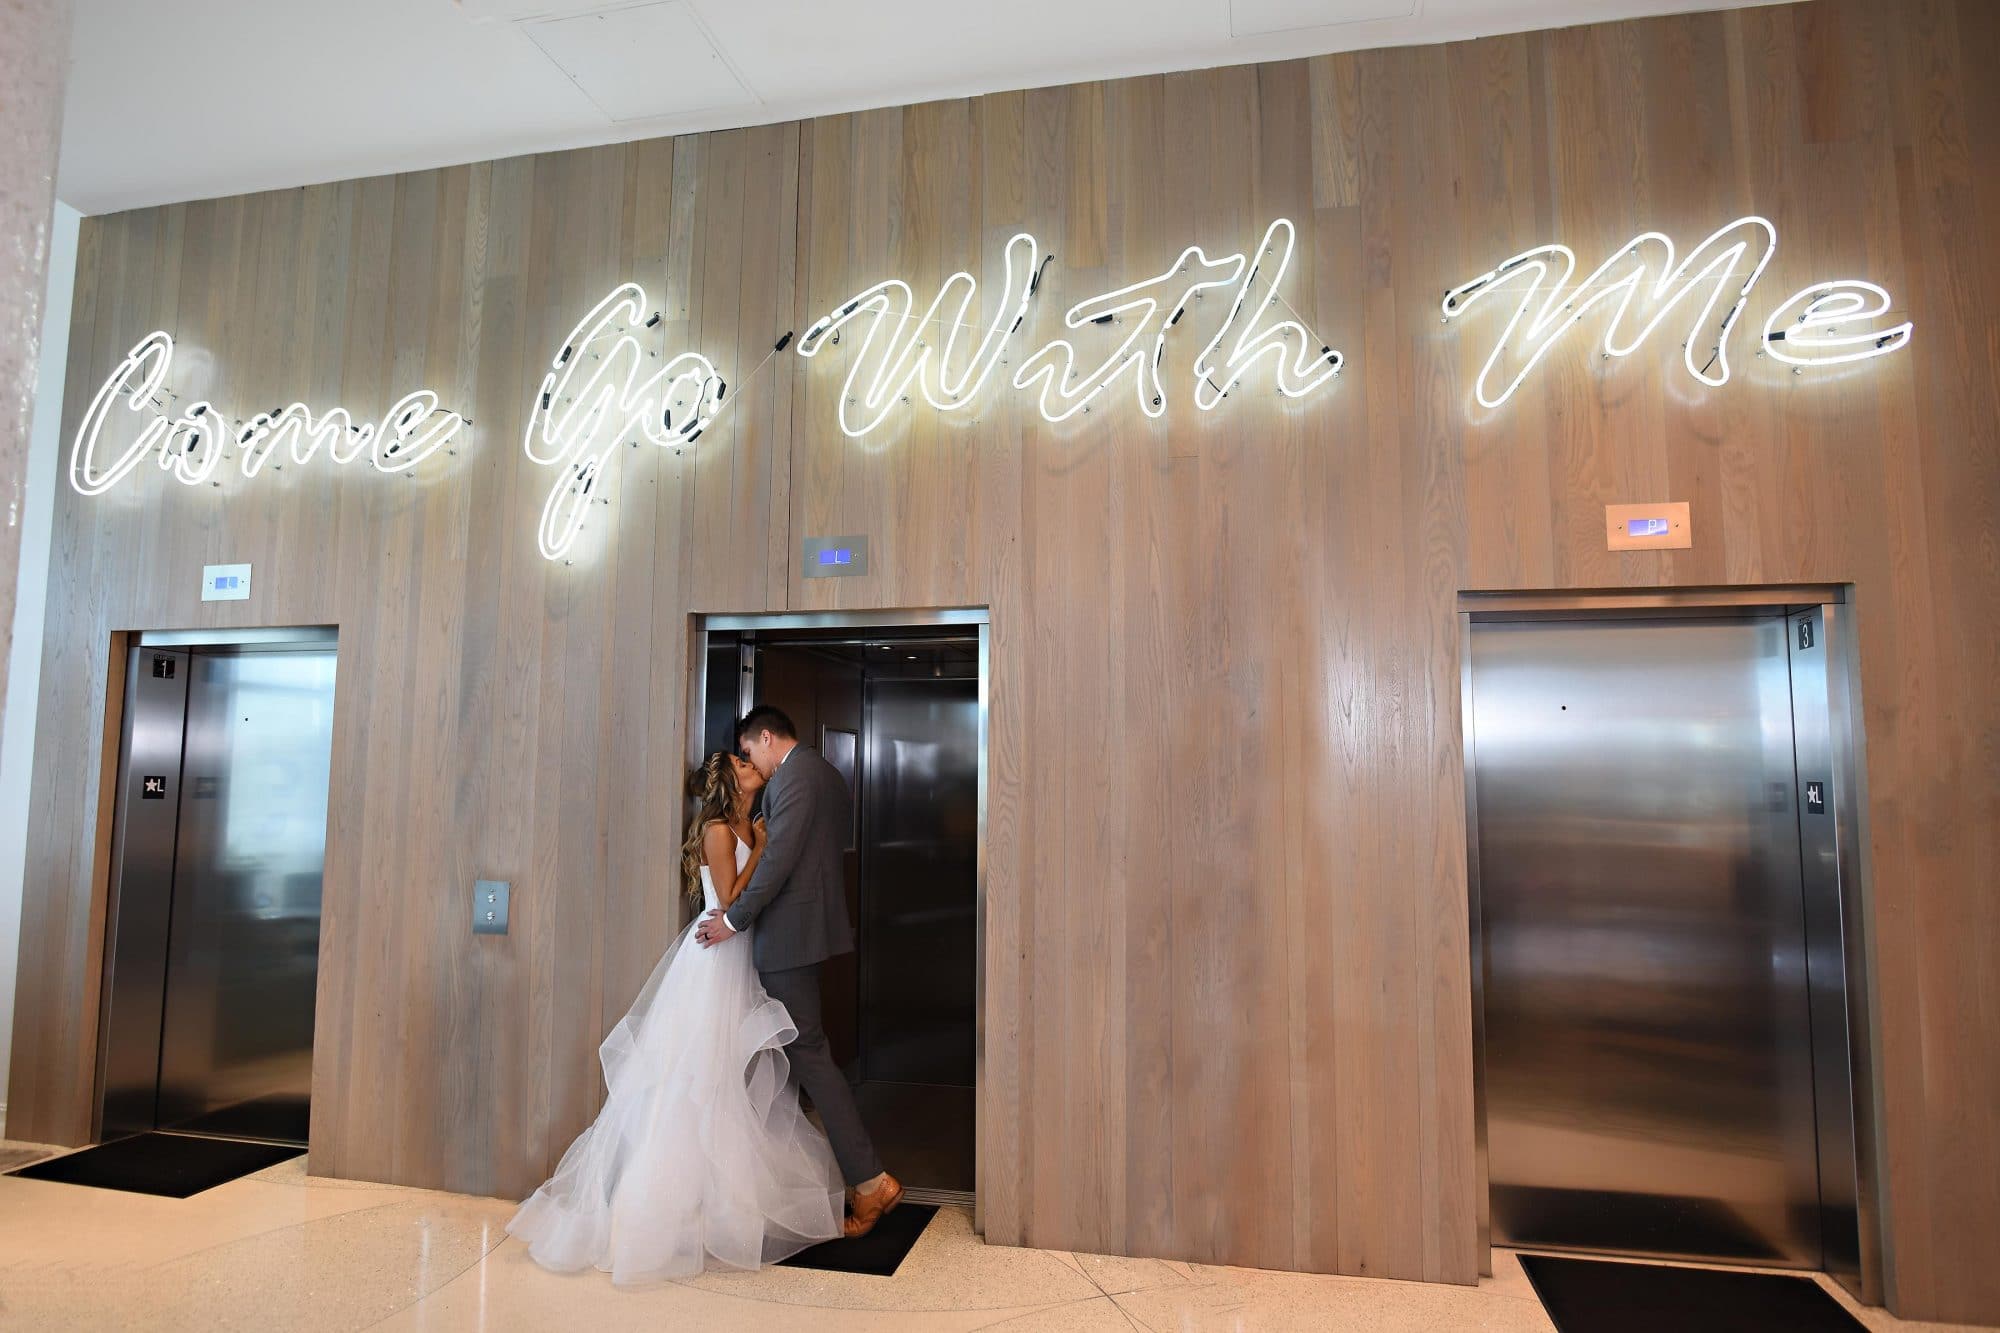 bride and groom kissing in elevator with neon sign above reading "Come Go With Me"